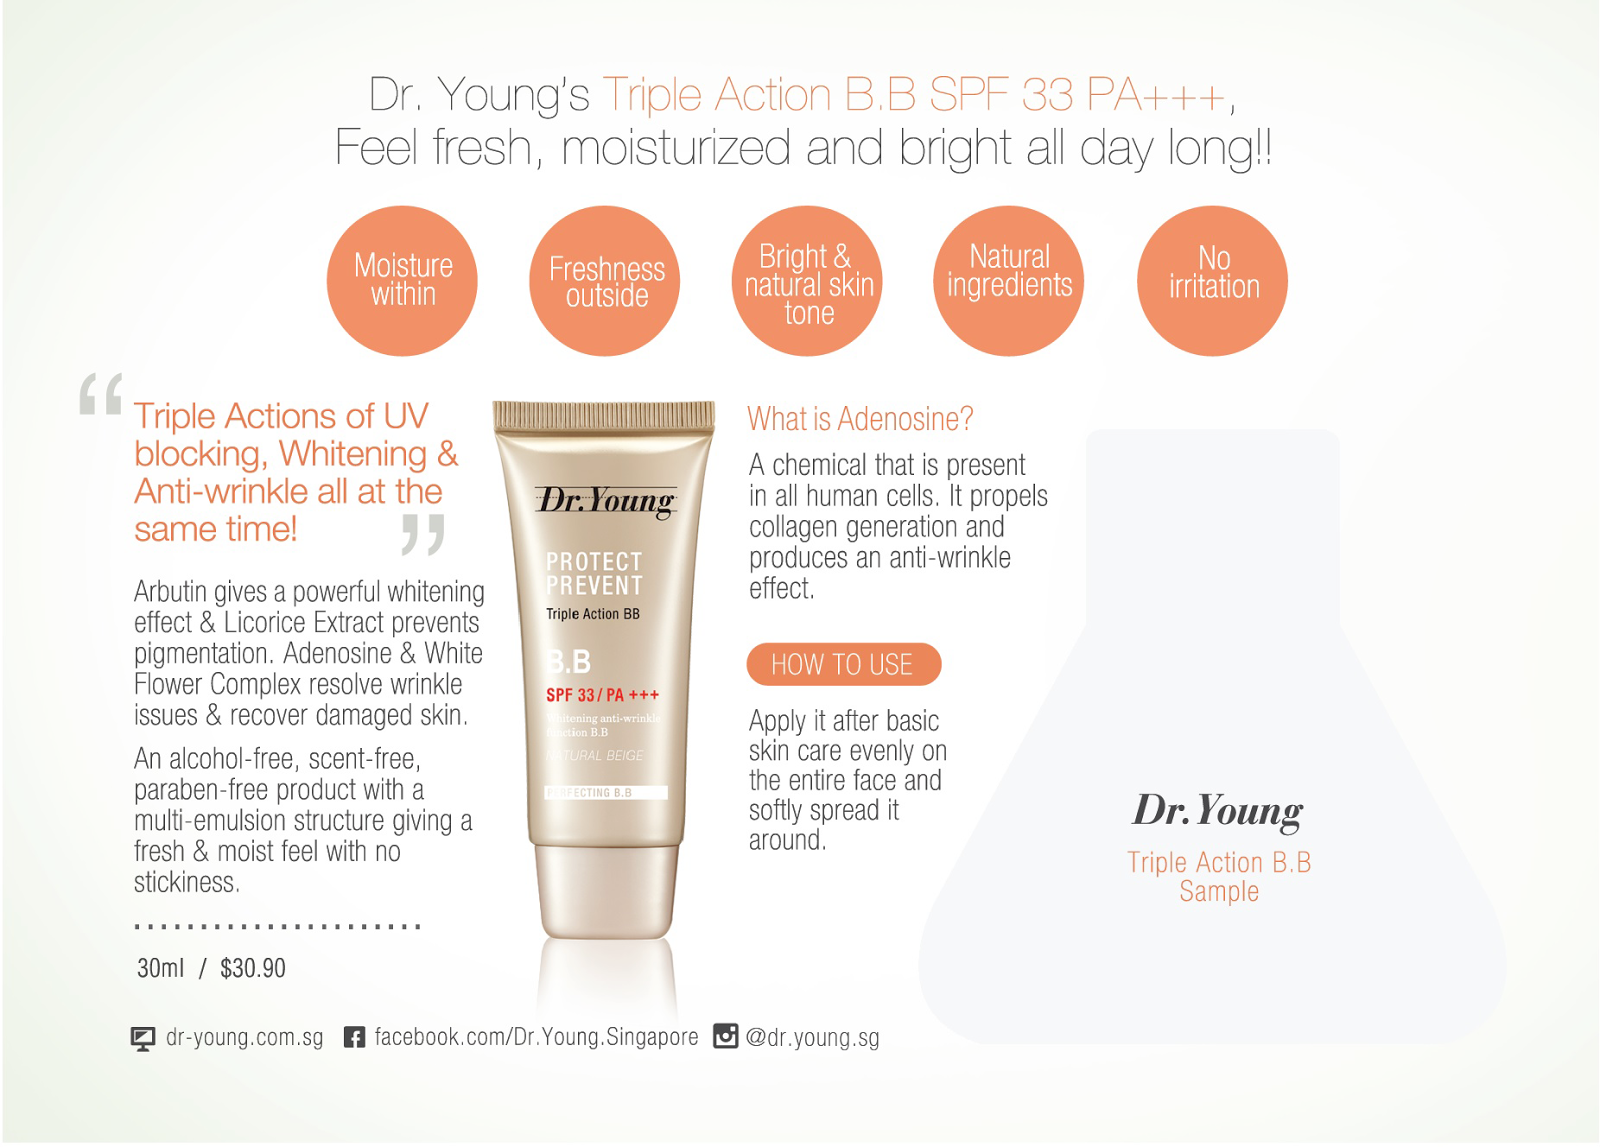 Advertorial: Dr. Young Triple Action BB Cream | Samantha Joy